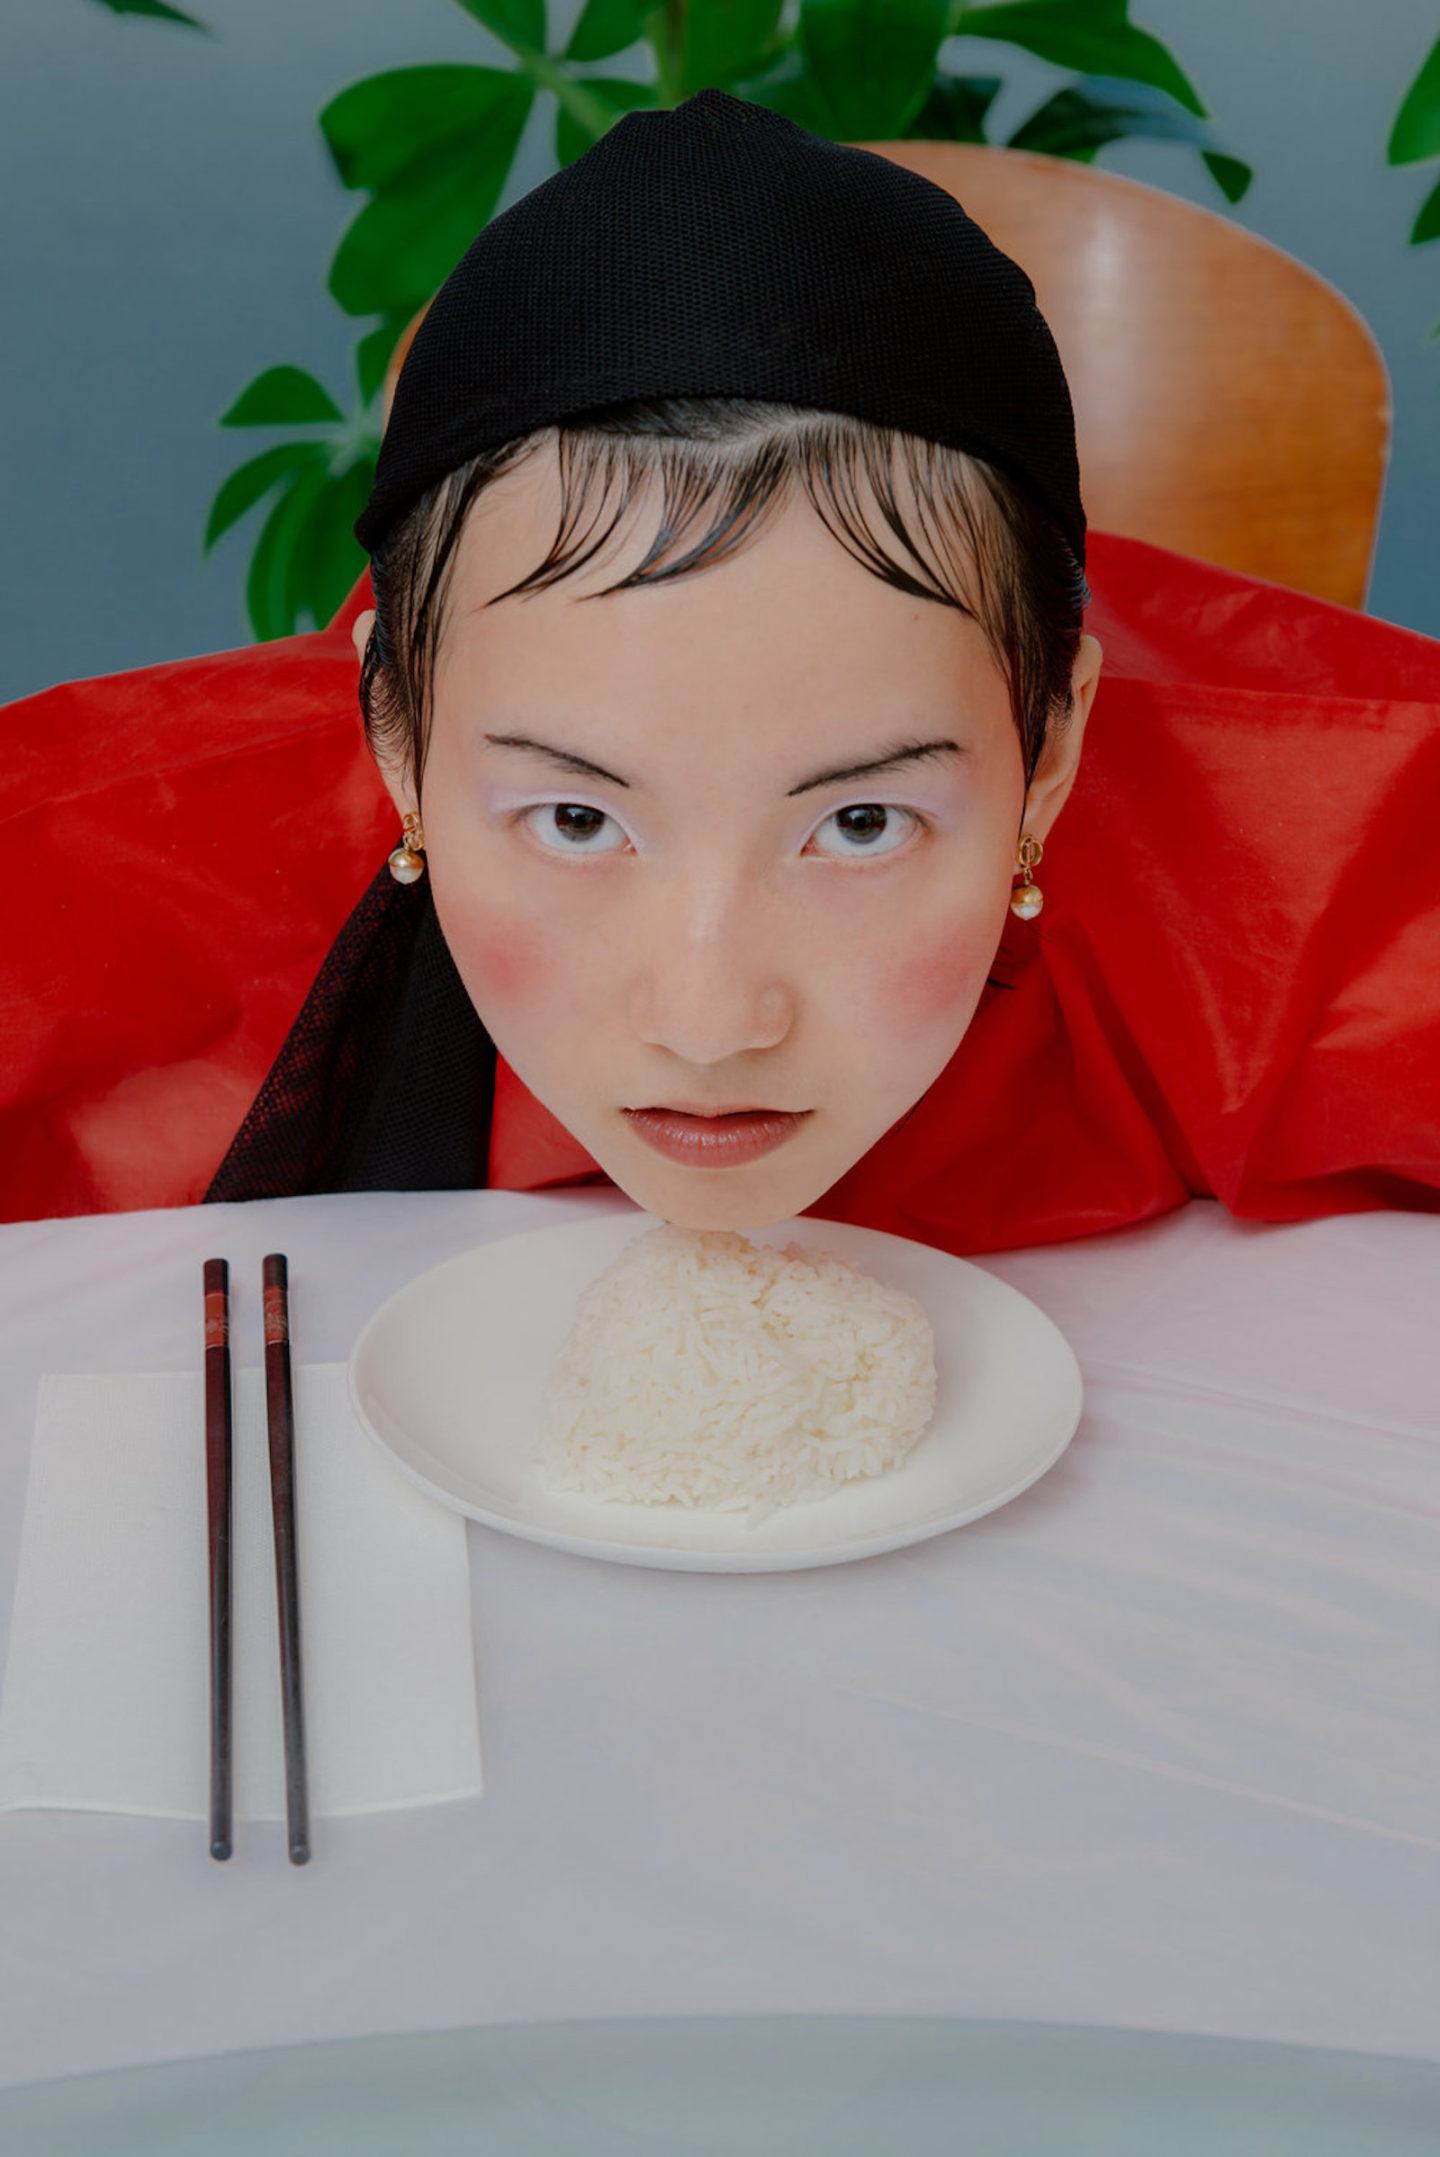 IGNANT-Photography-Betty-Liu-Jess-Brohier-Eating-The-Other-002